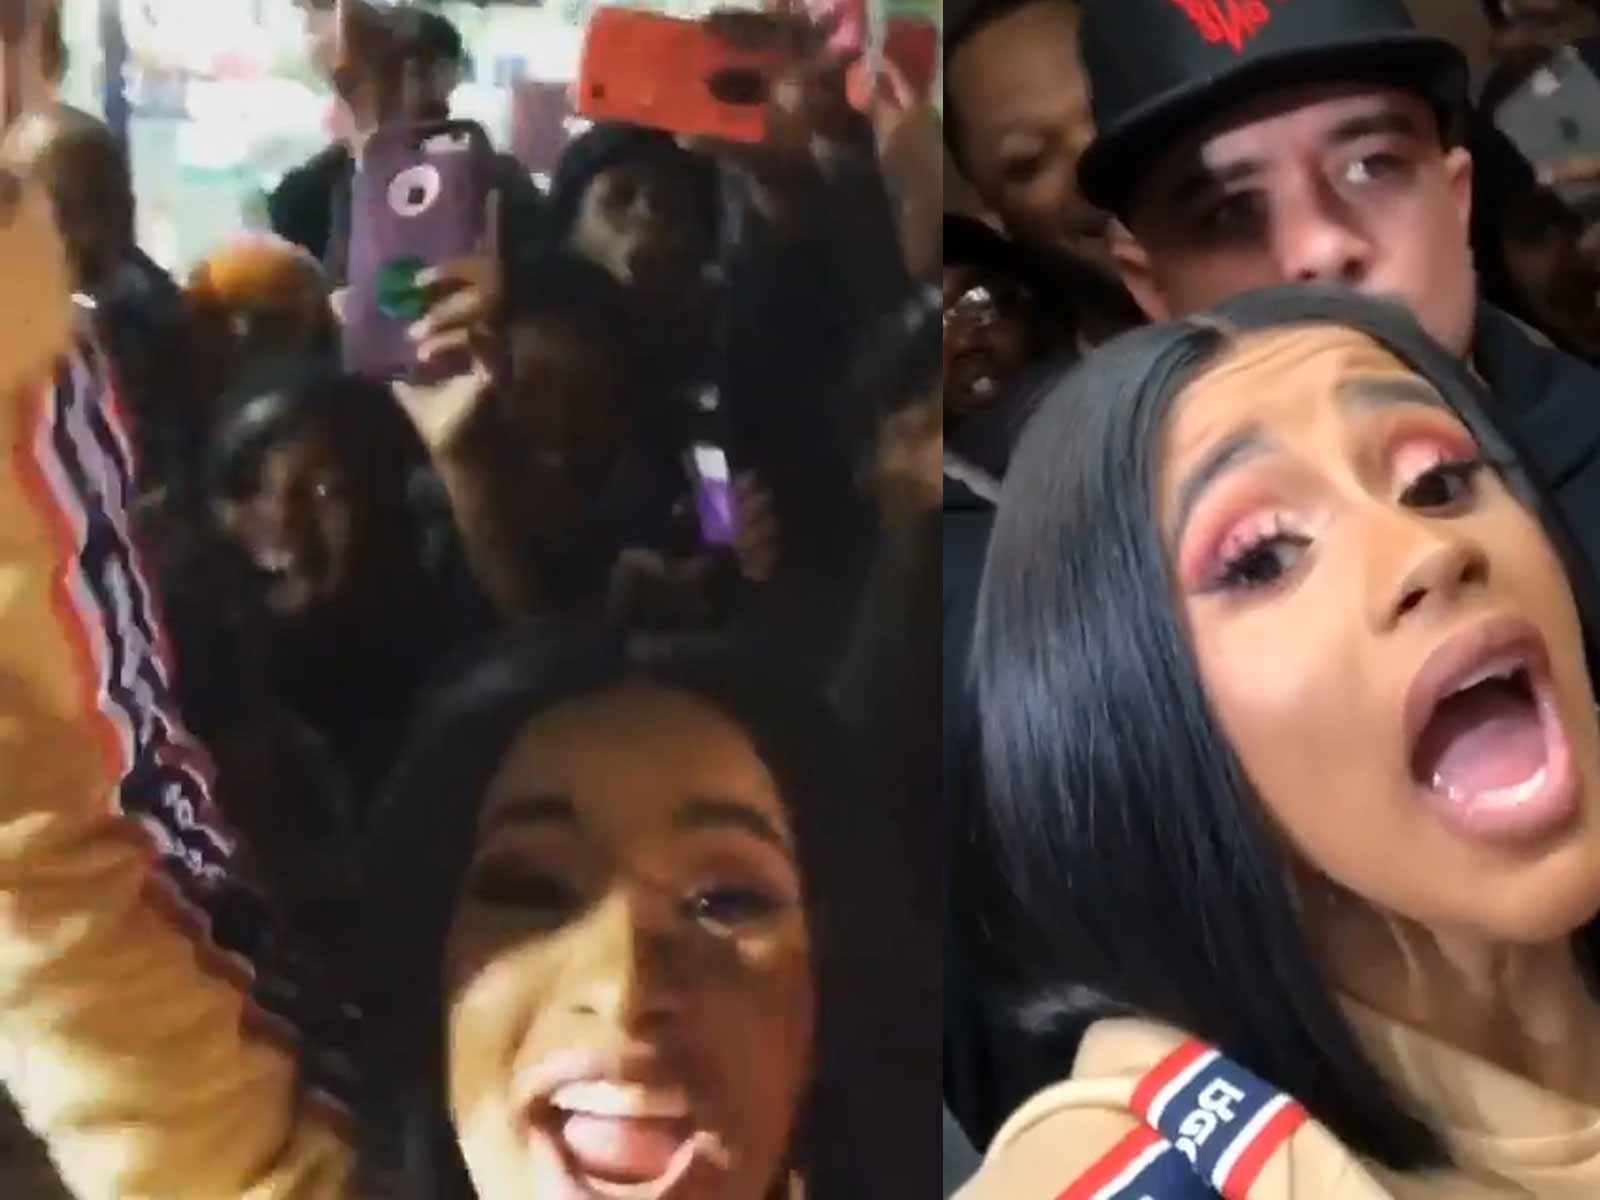 Cardi B Warms Up Fans by Handing Out Winter Coats